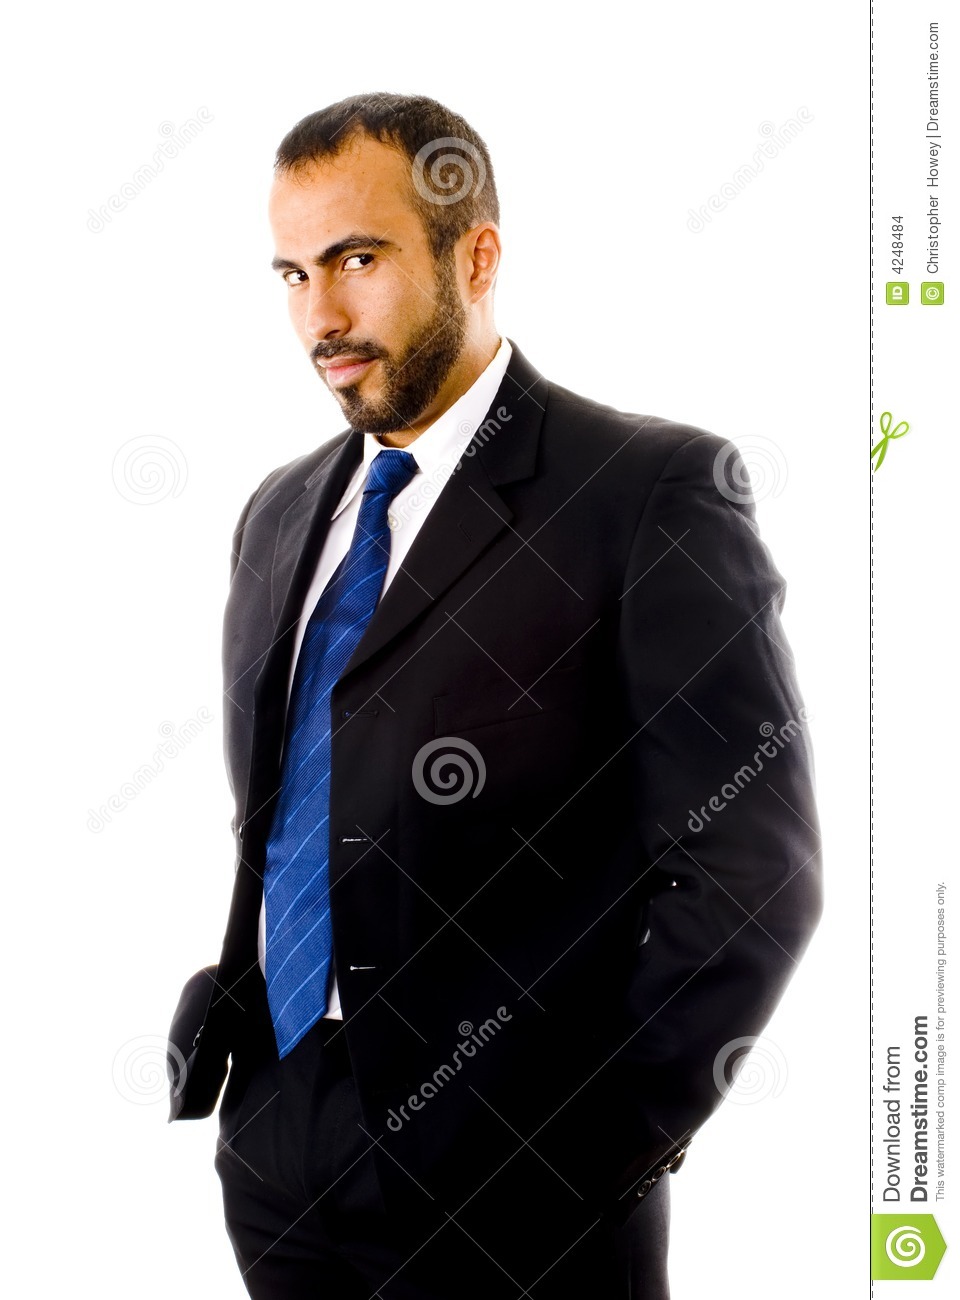 This Image Shows A Hispanic Man In A Suit With A Coy Look